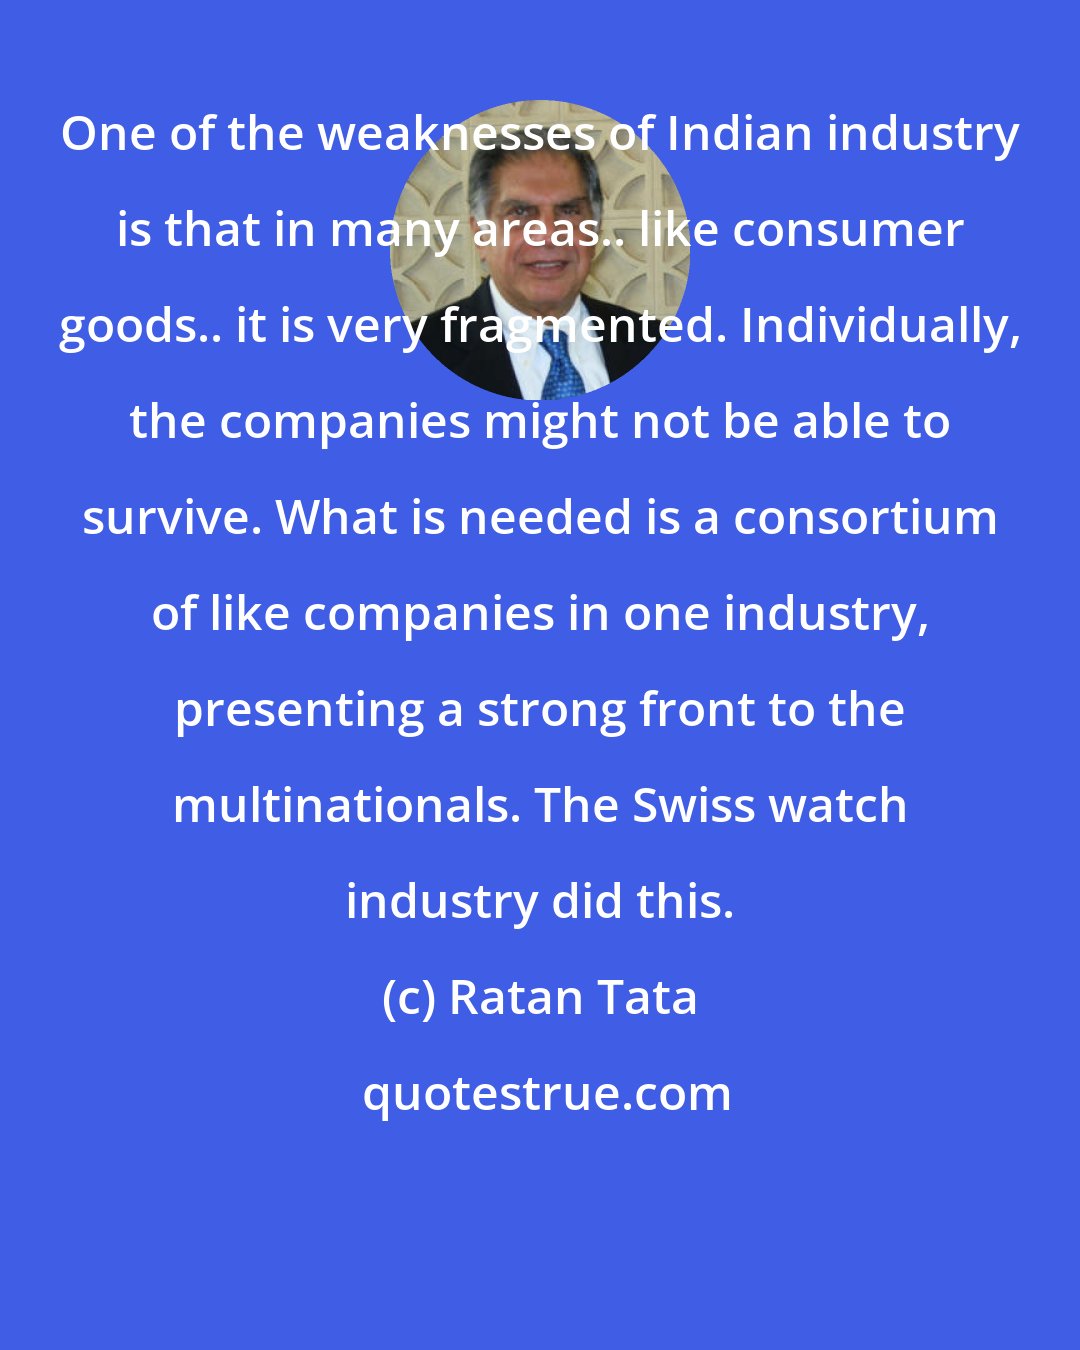 Ratan Tata: One of the weaknesses of Indian industry is that in many areas.. like consumer goods.. it is very fragmented. Individually, the companies might not be able to survive. What is needed is a consortium of like companies in one industry, presenting a strong front to the multinationals. The Swiss watch industry did this.